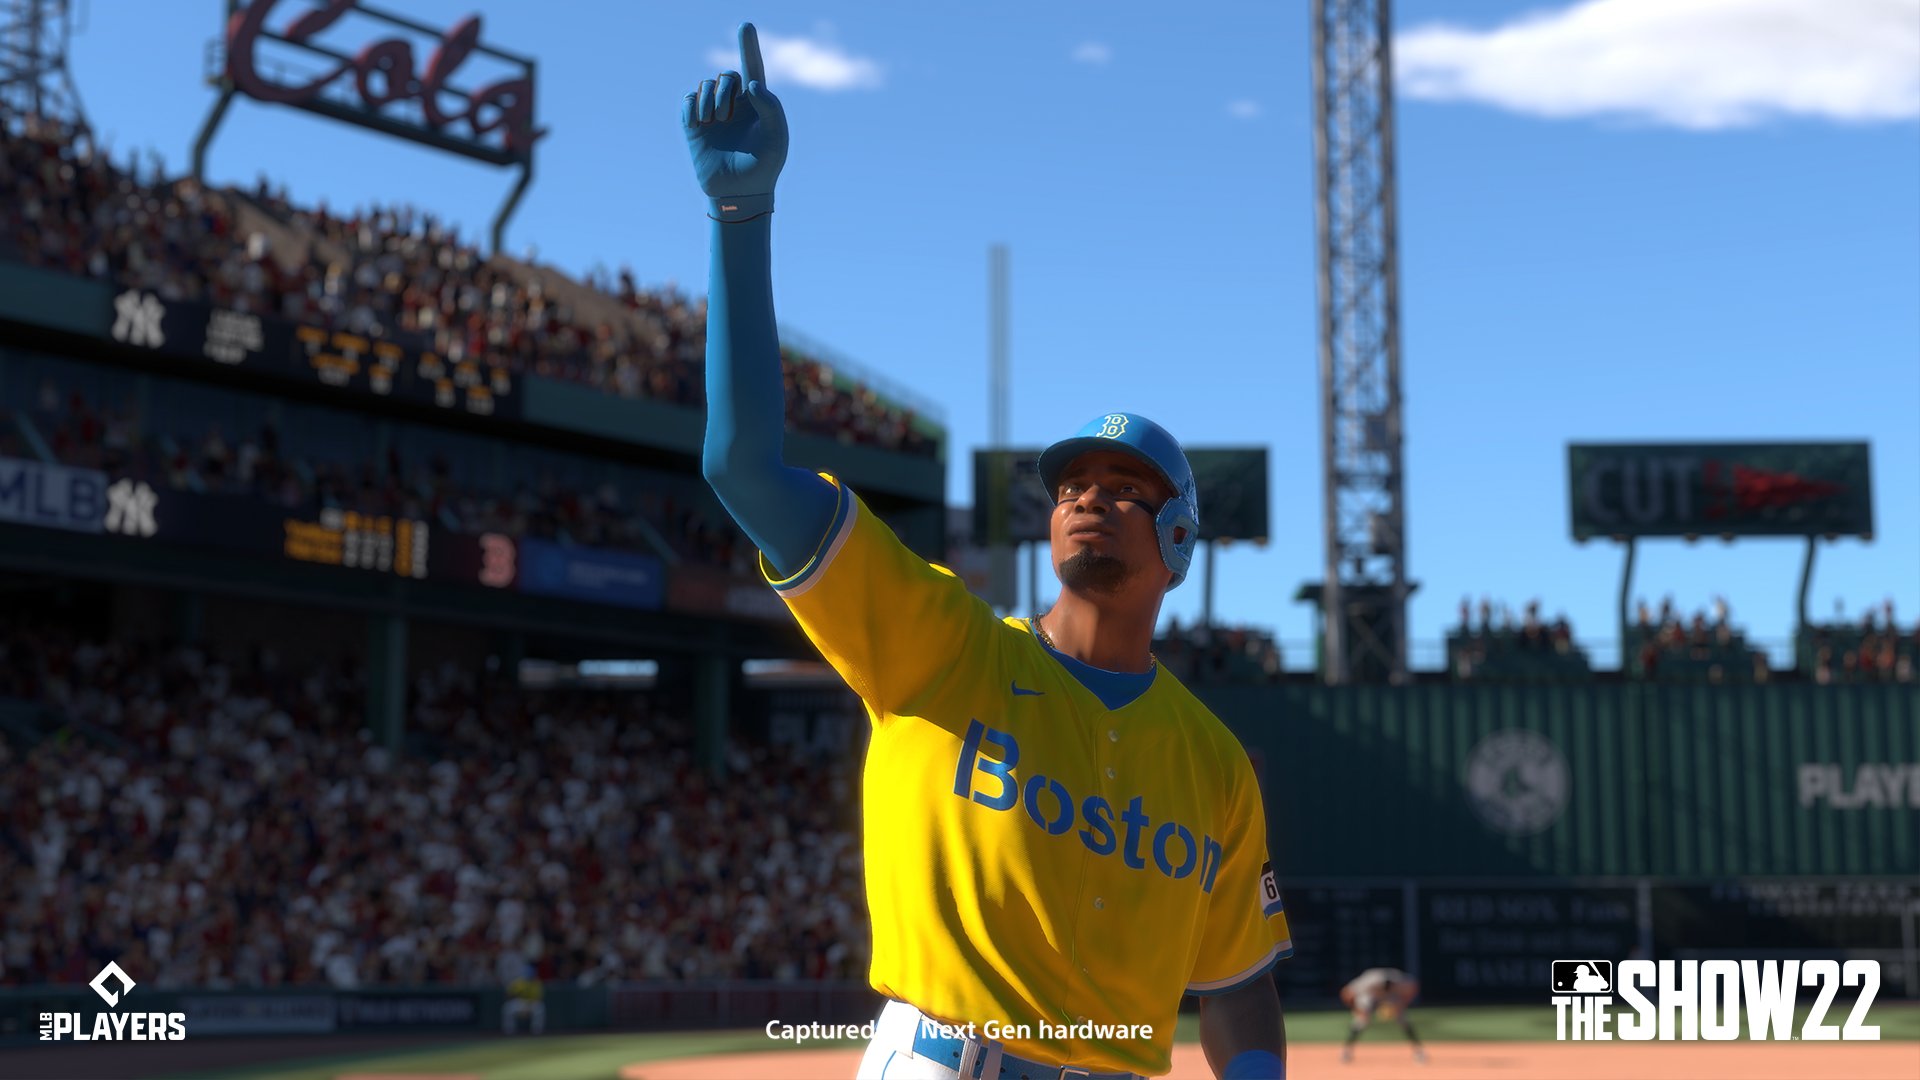 MLB The Show on X: The power of sports and the strength of Boston